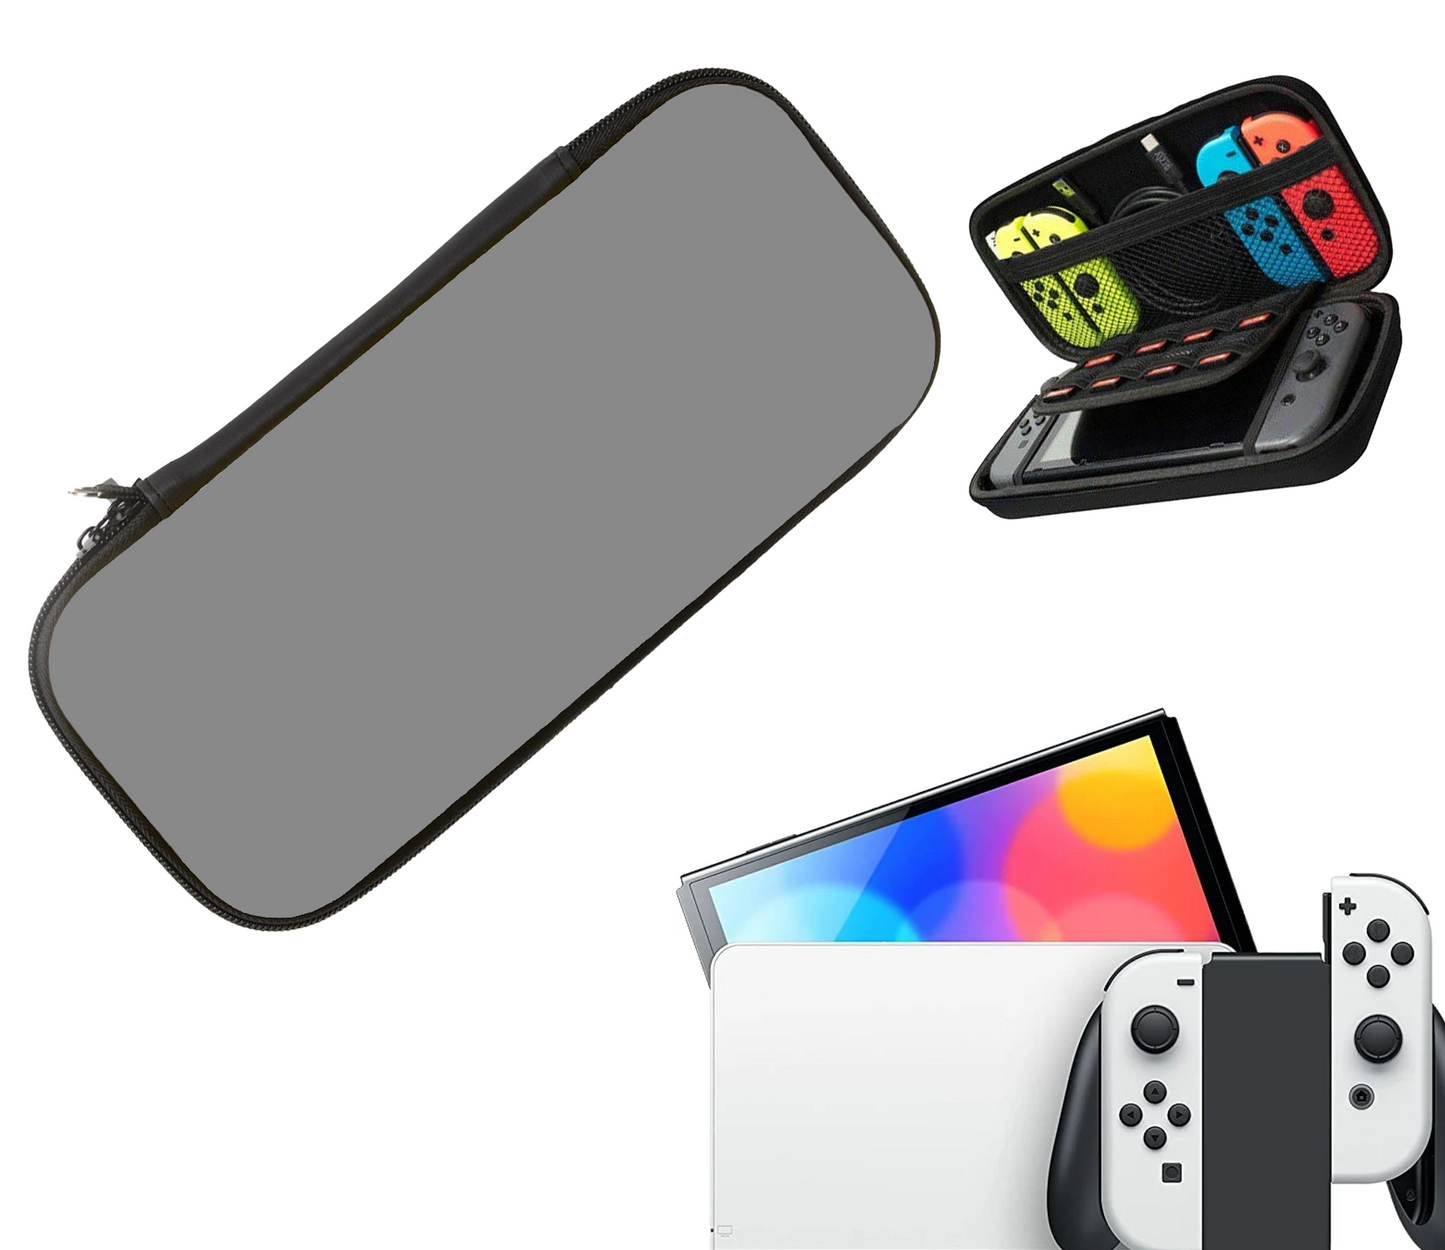 Protective cover | Hardcase Storage Cover | Case | Gray - Gray | Accessories suitable for Nintendo Switch